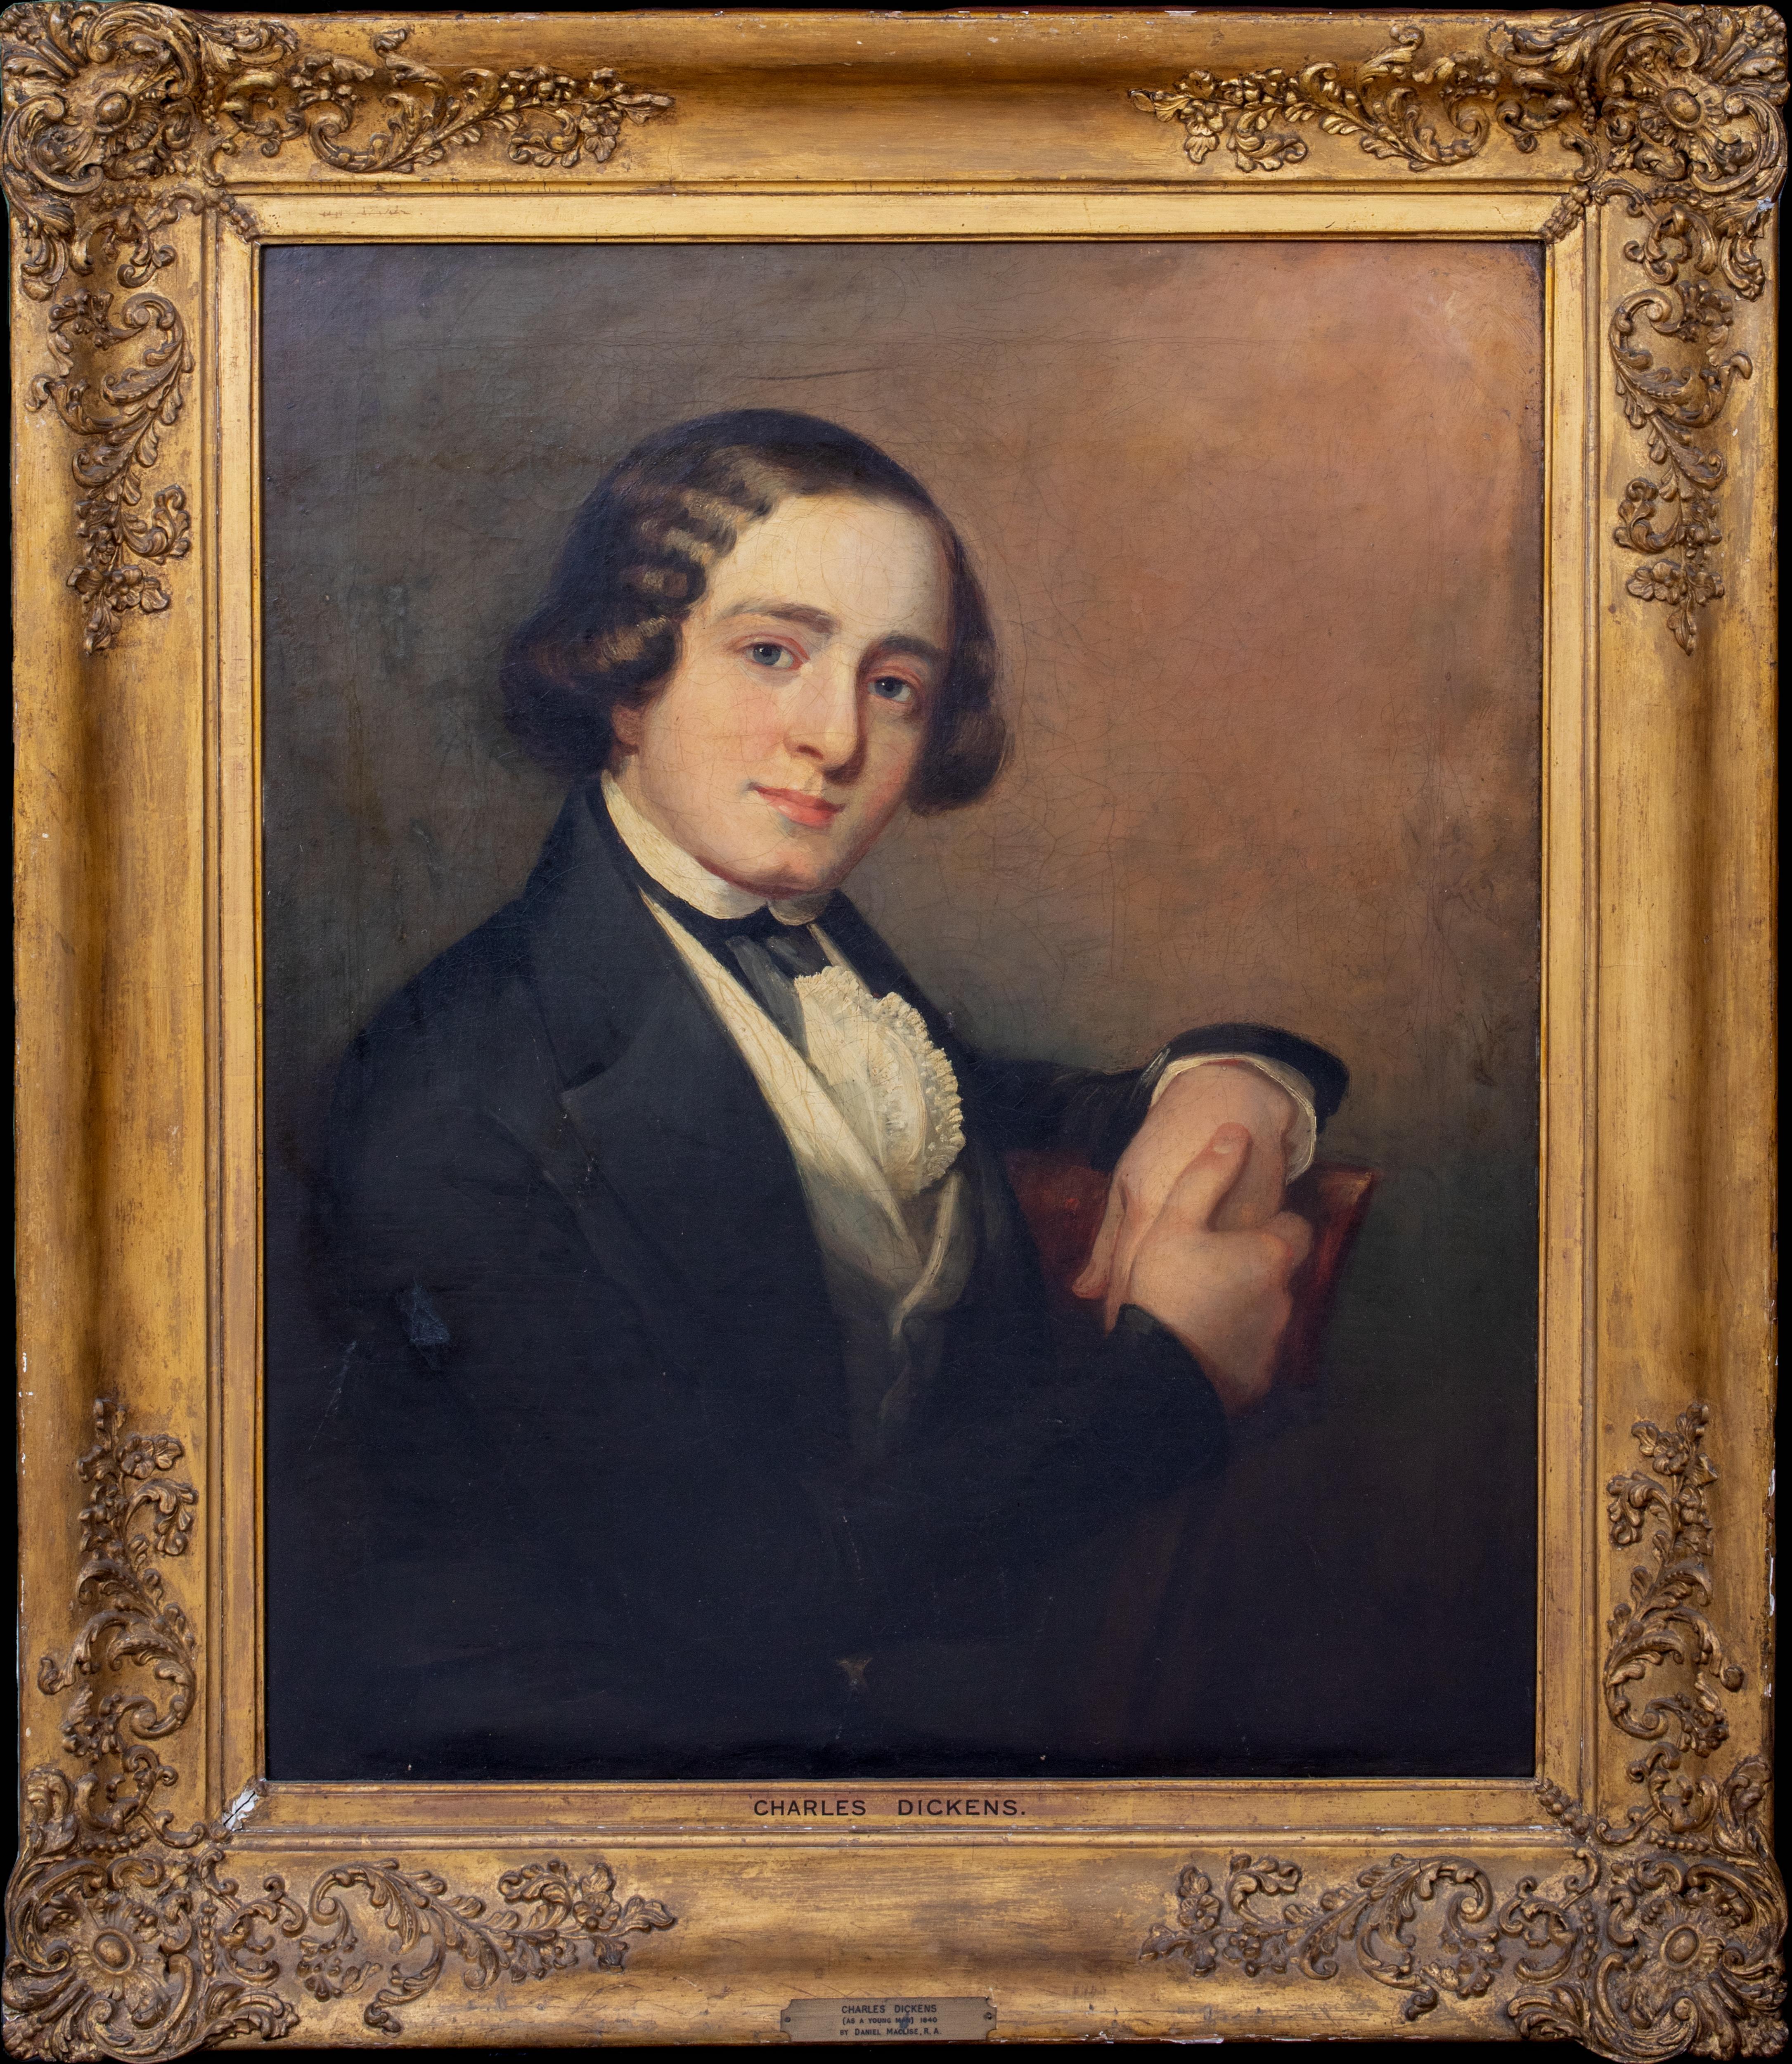 Daniel Maclise Portrait Painting - Portrait Of Charles Dickens (1812-1870), dated 1840  